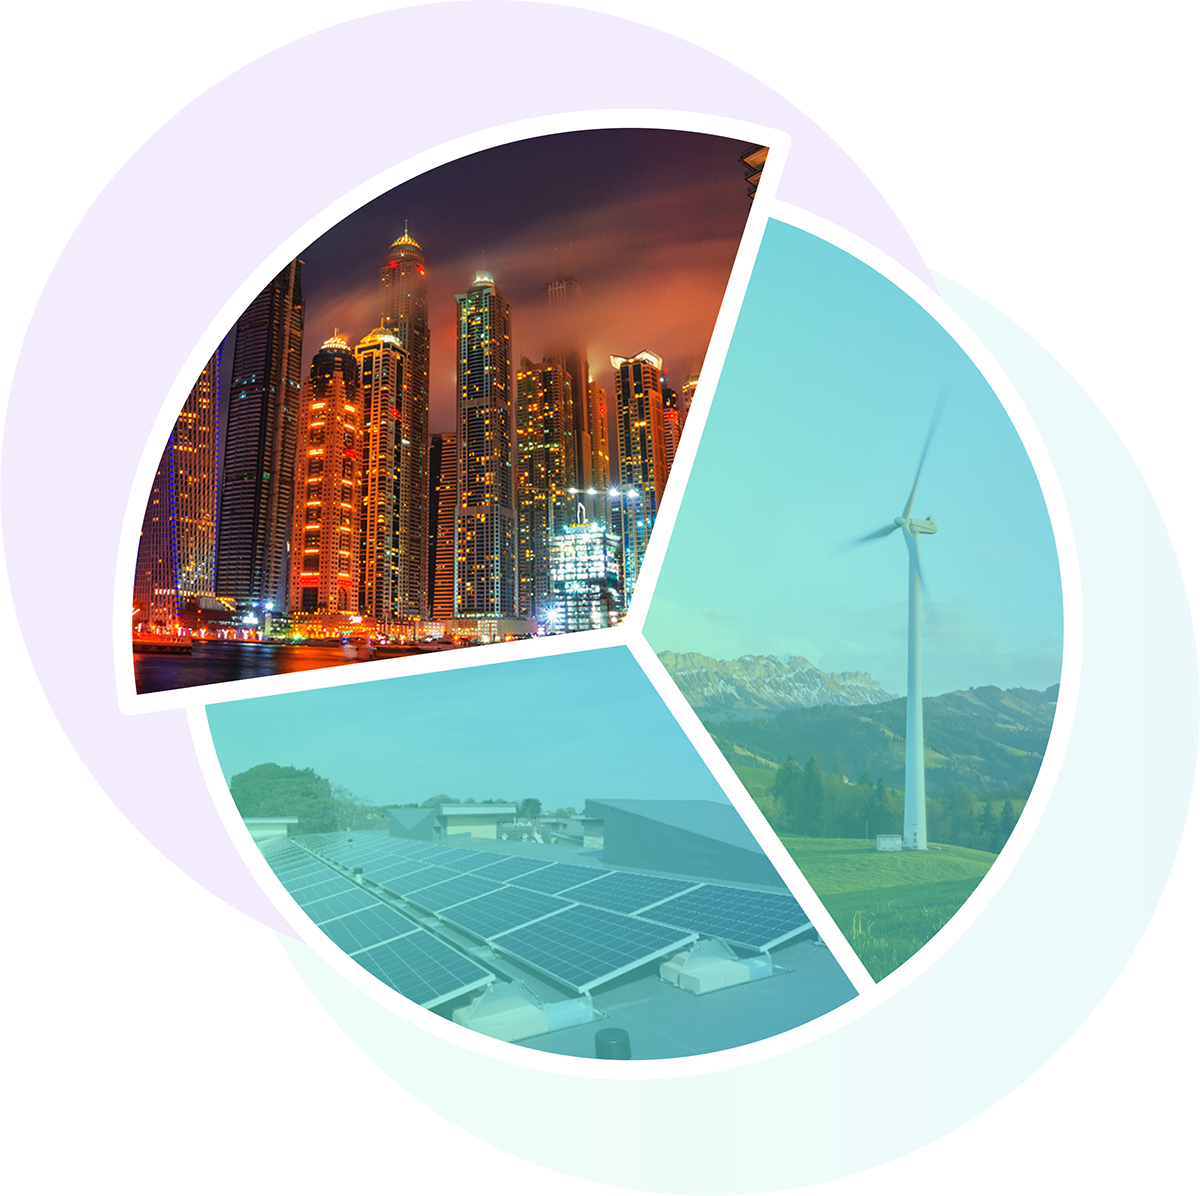 Pie chart shaped illustration with segments showing a night time city skyline, wind power and solar panels